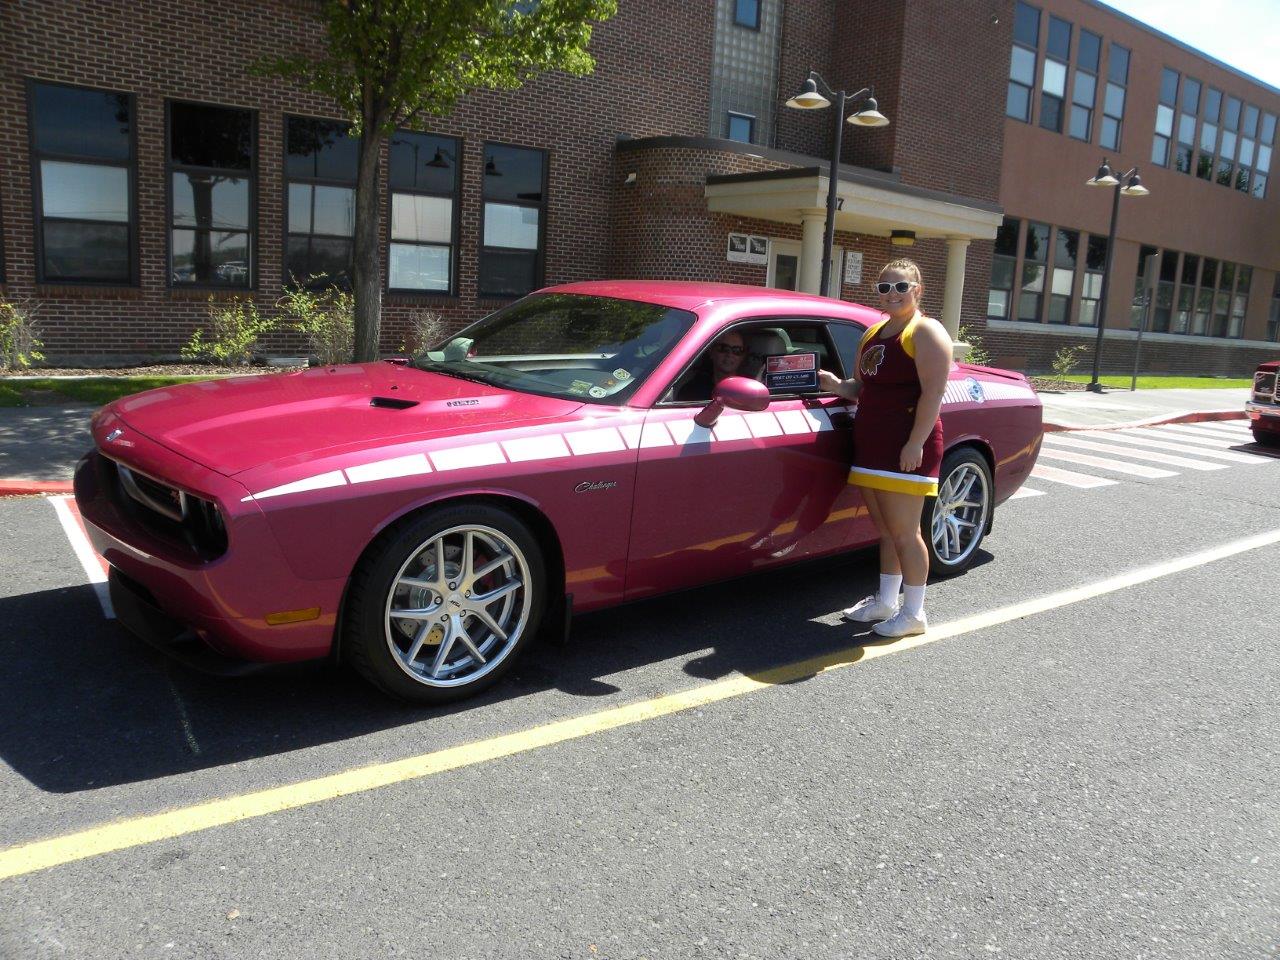 Custom Car 1970 to 2018 - 2010 Dodge Challenger - Kathy Bruning